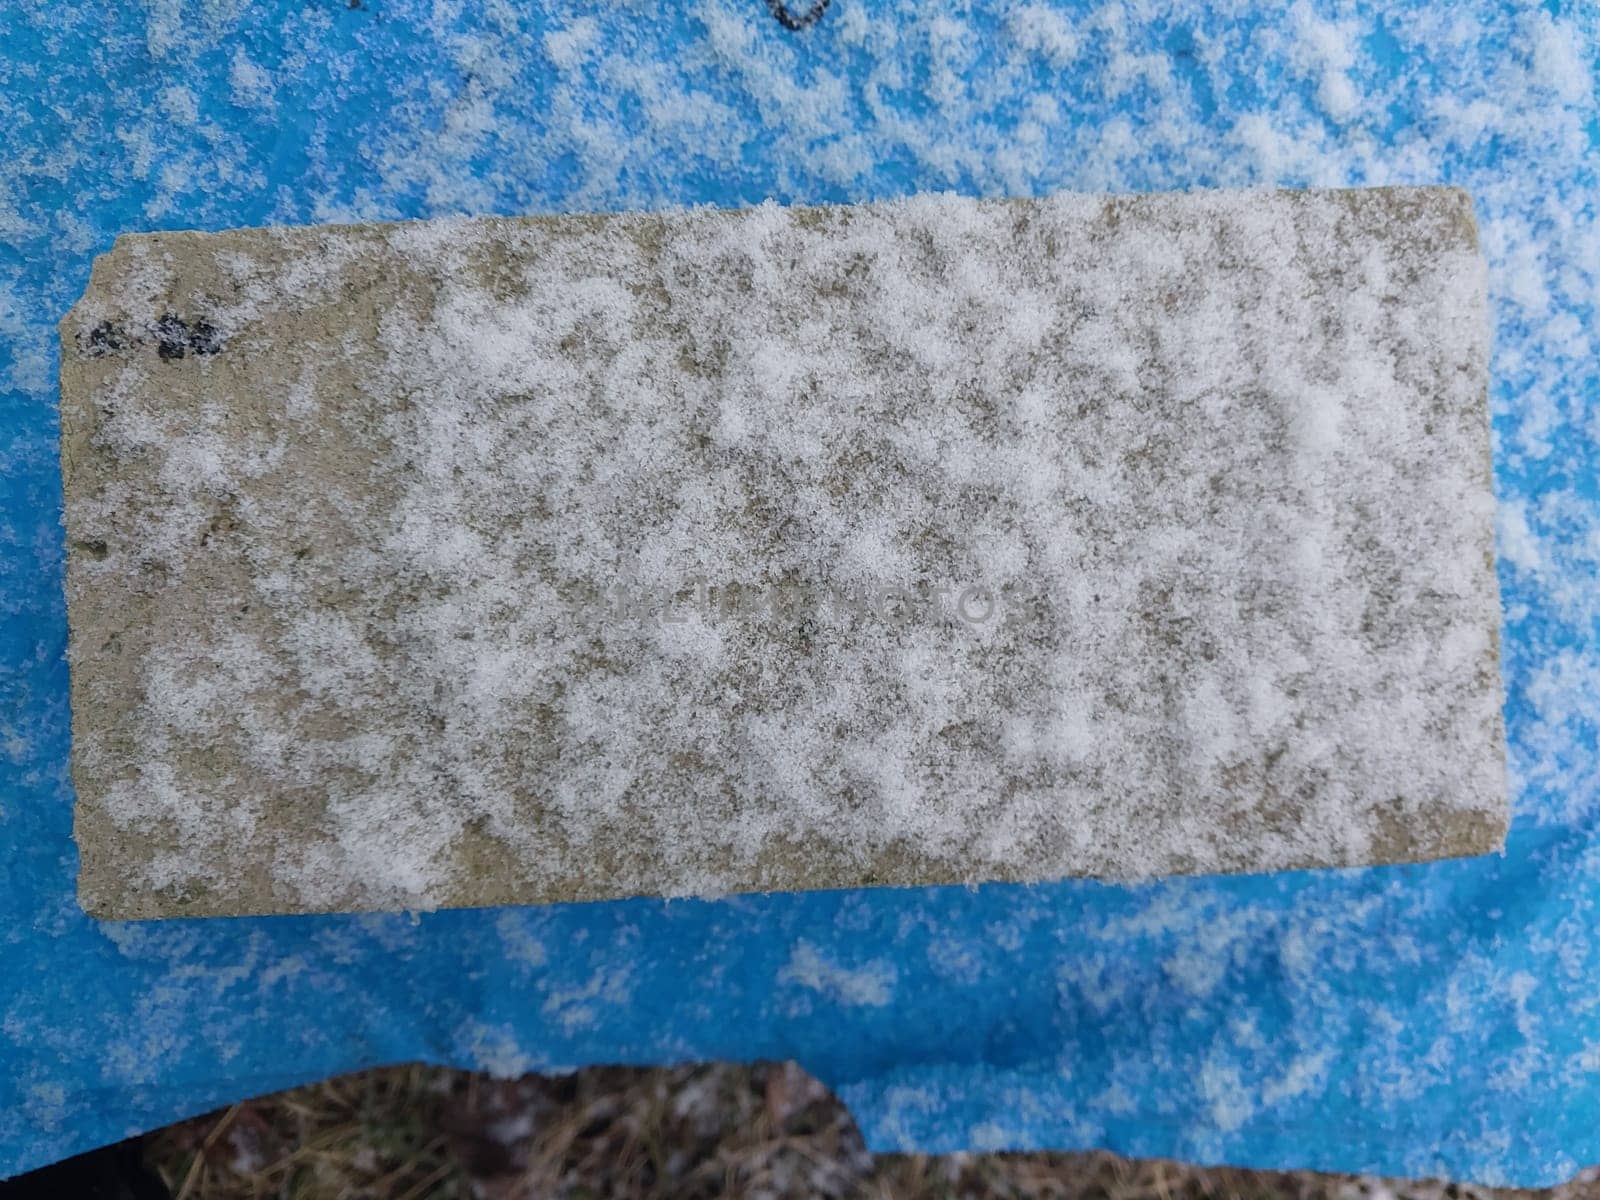 Texture of fallen snow on objects by architectphd